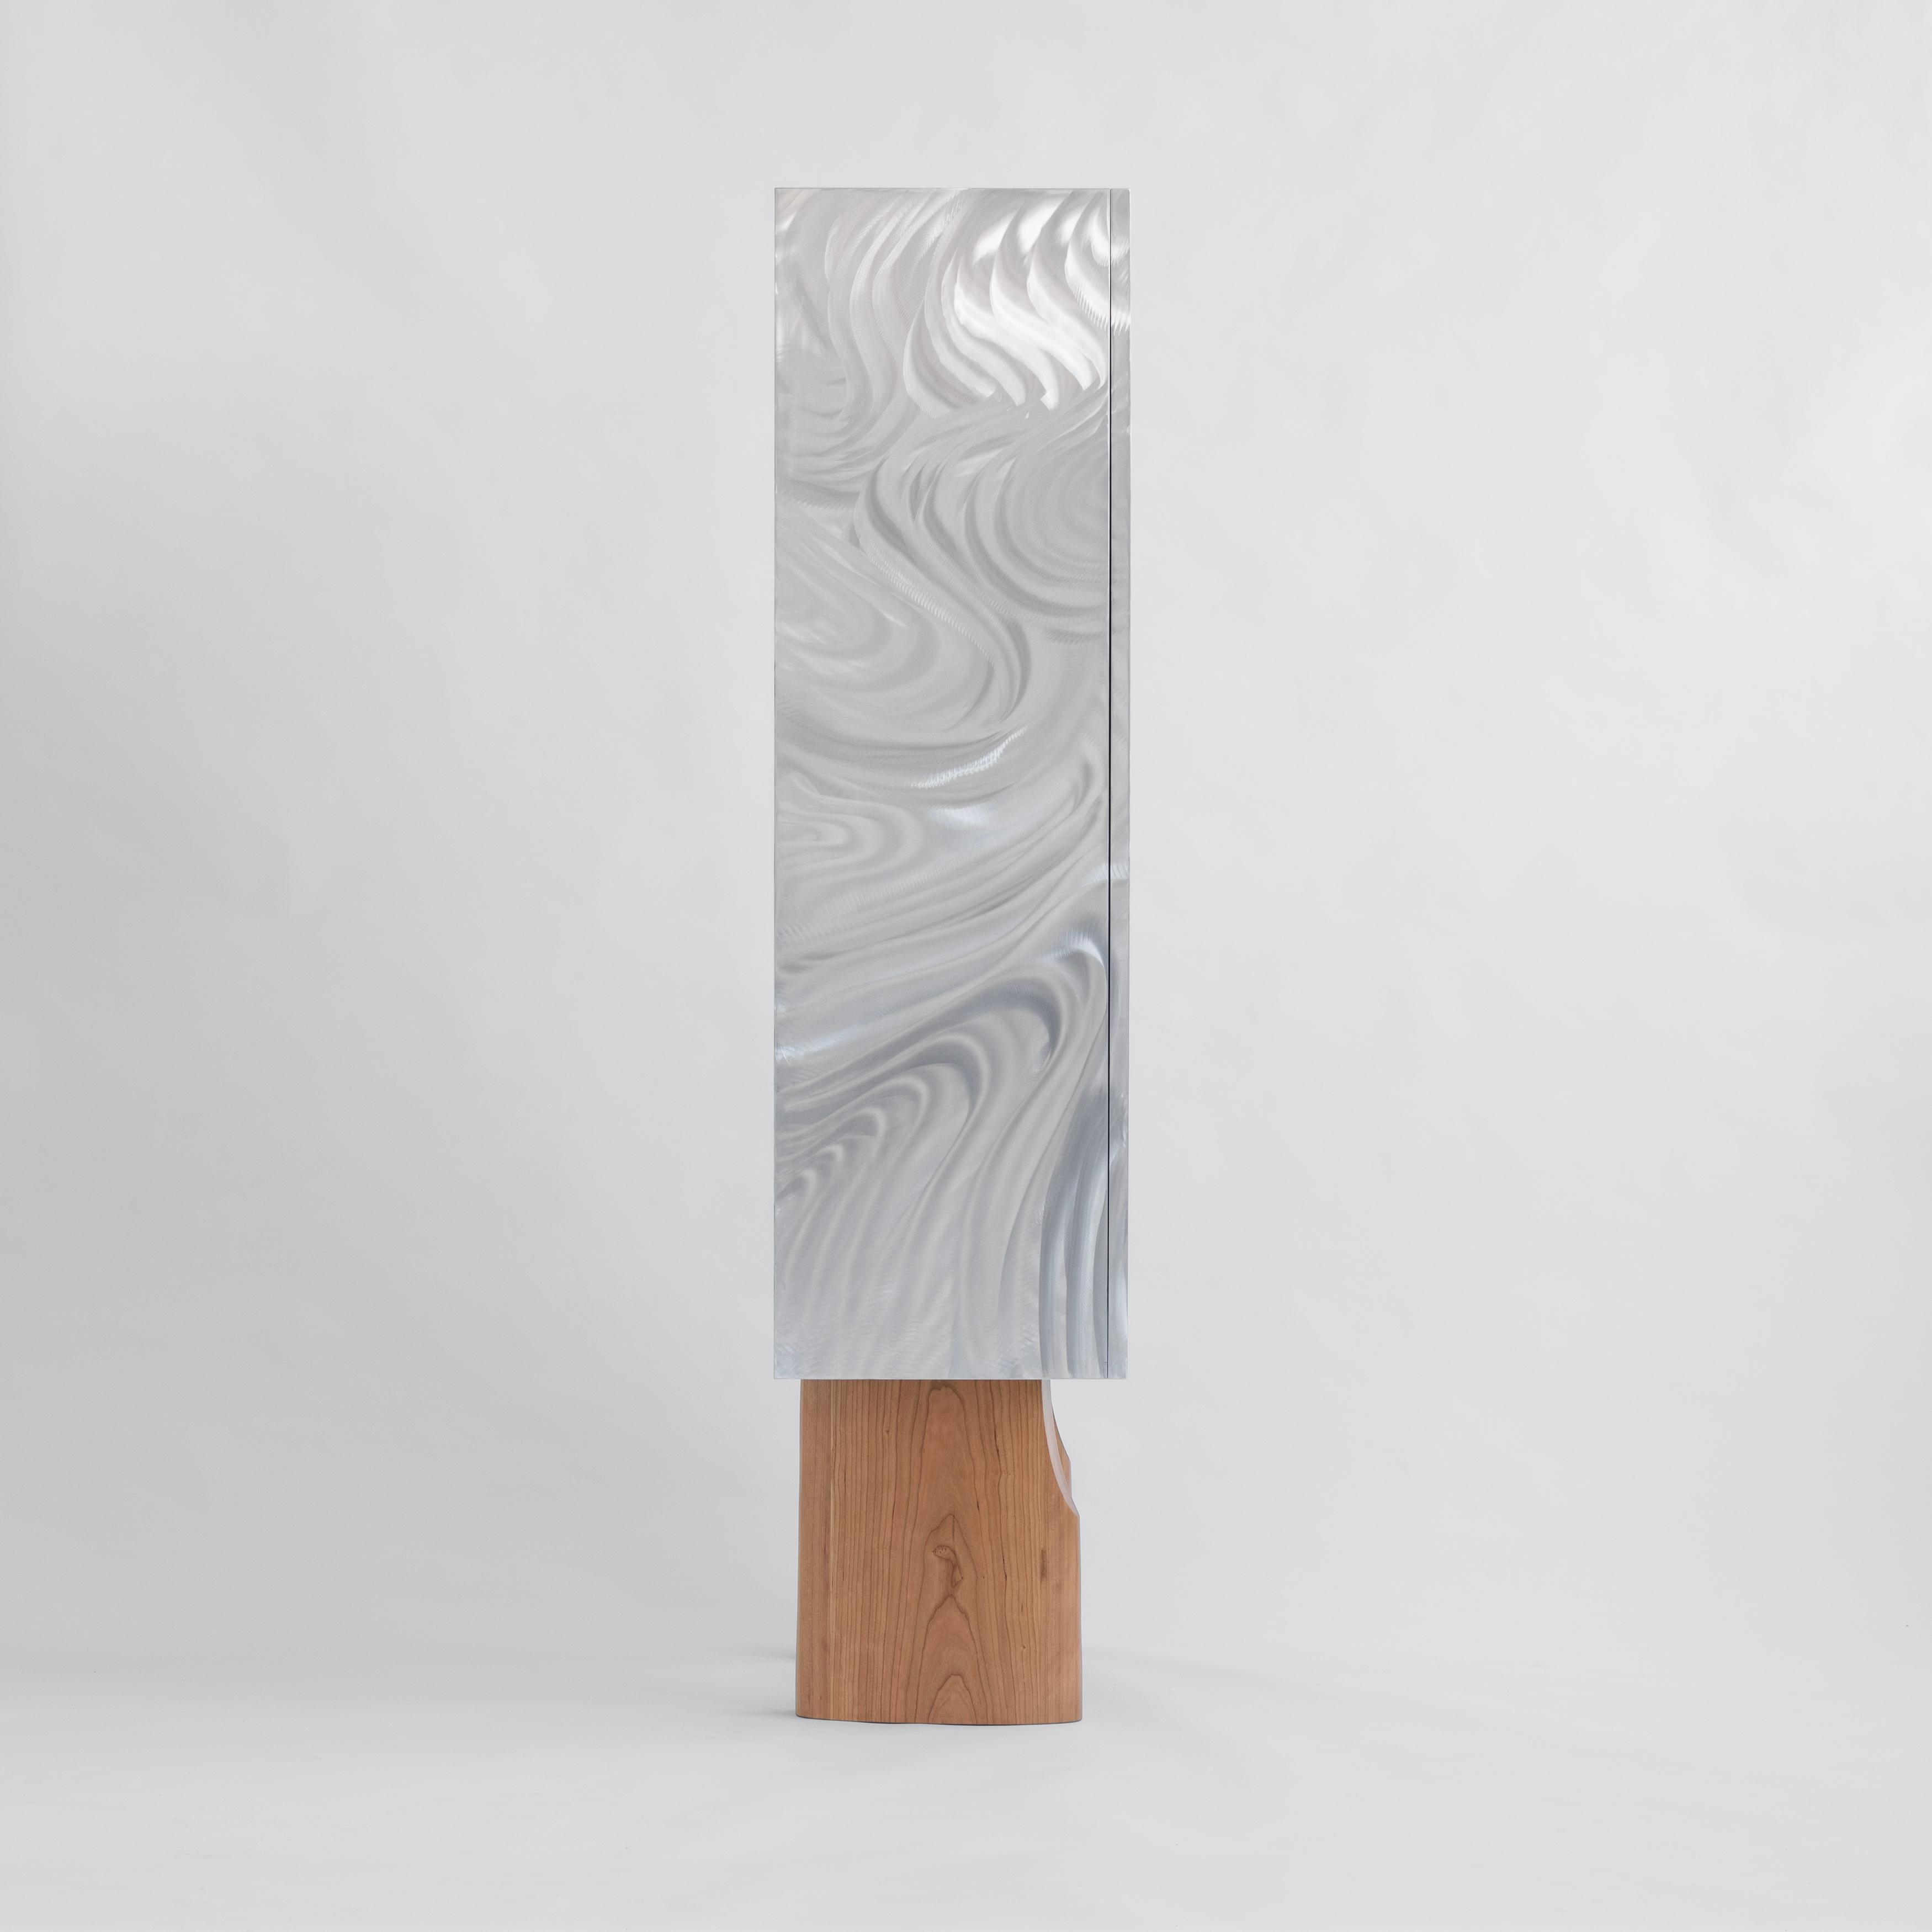 Meltemi is inspired by the annual harsh wind across the Aegean sea and features an experimental surface treatment. Like the winds, the environment - the tools and the metal surface - dictate the final sculptural finish of this piece.

! Please note